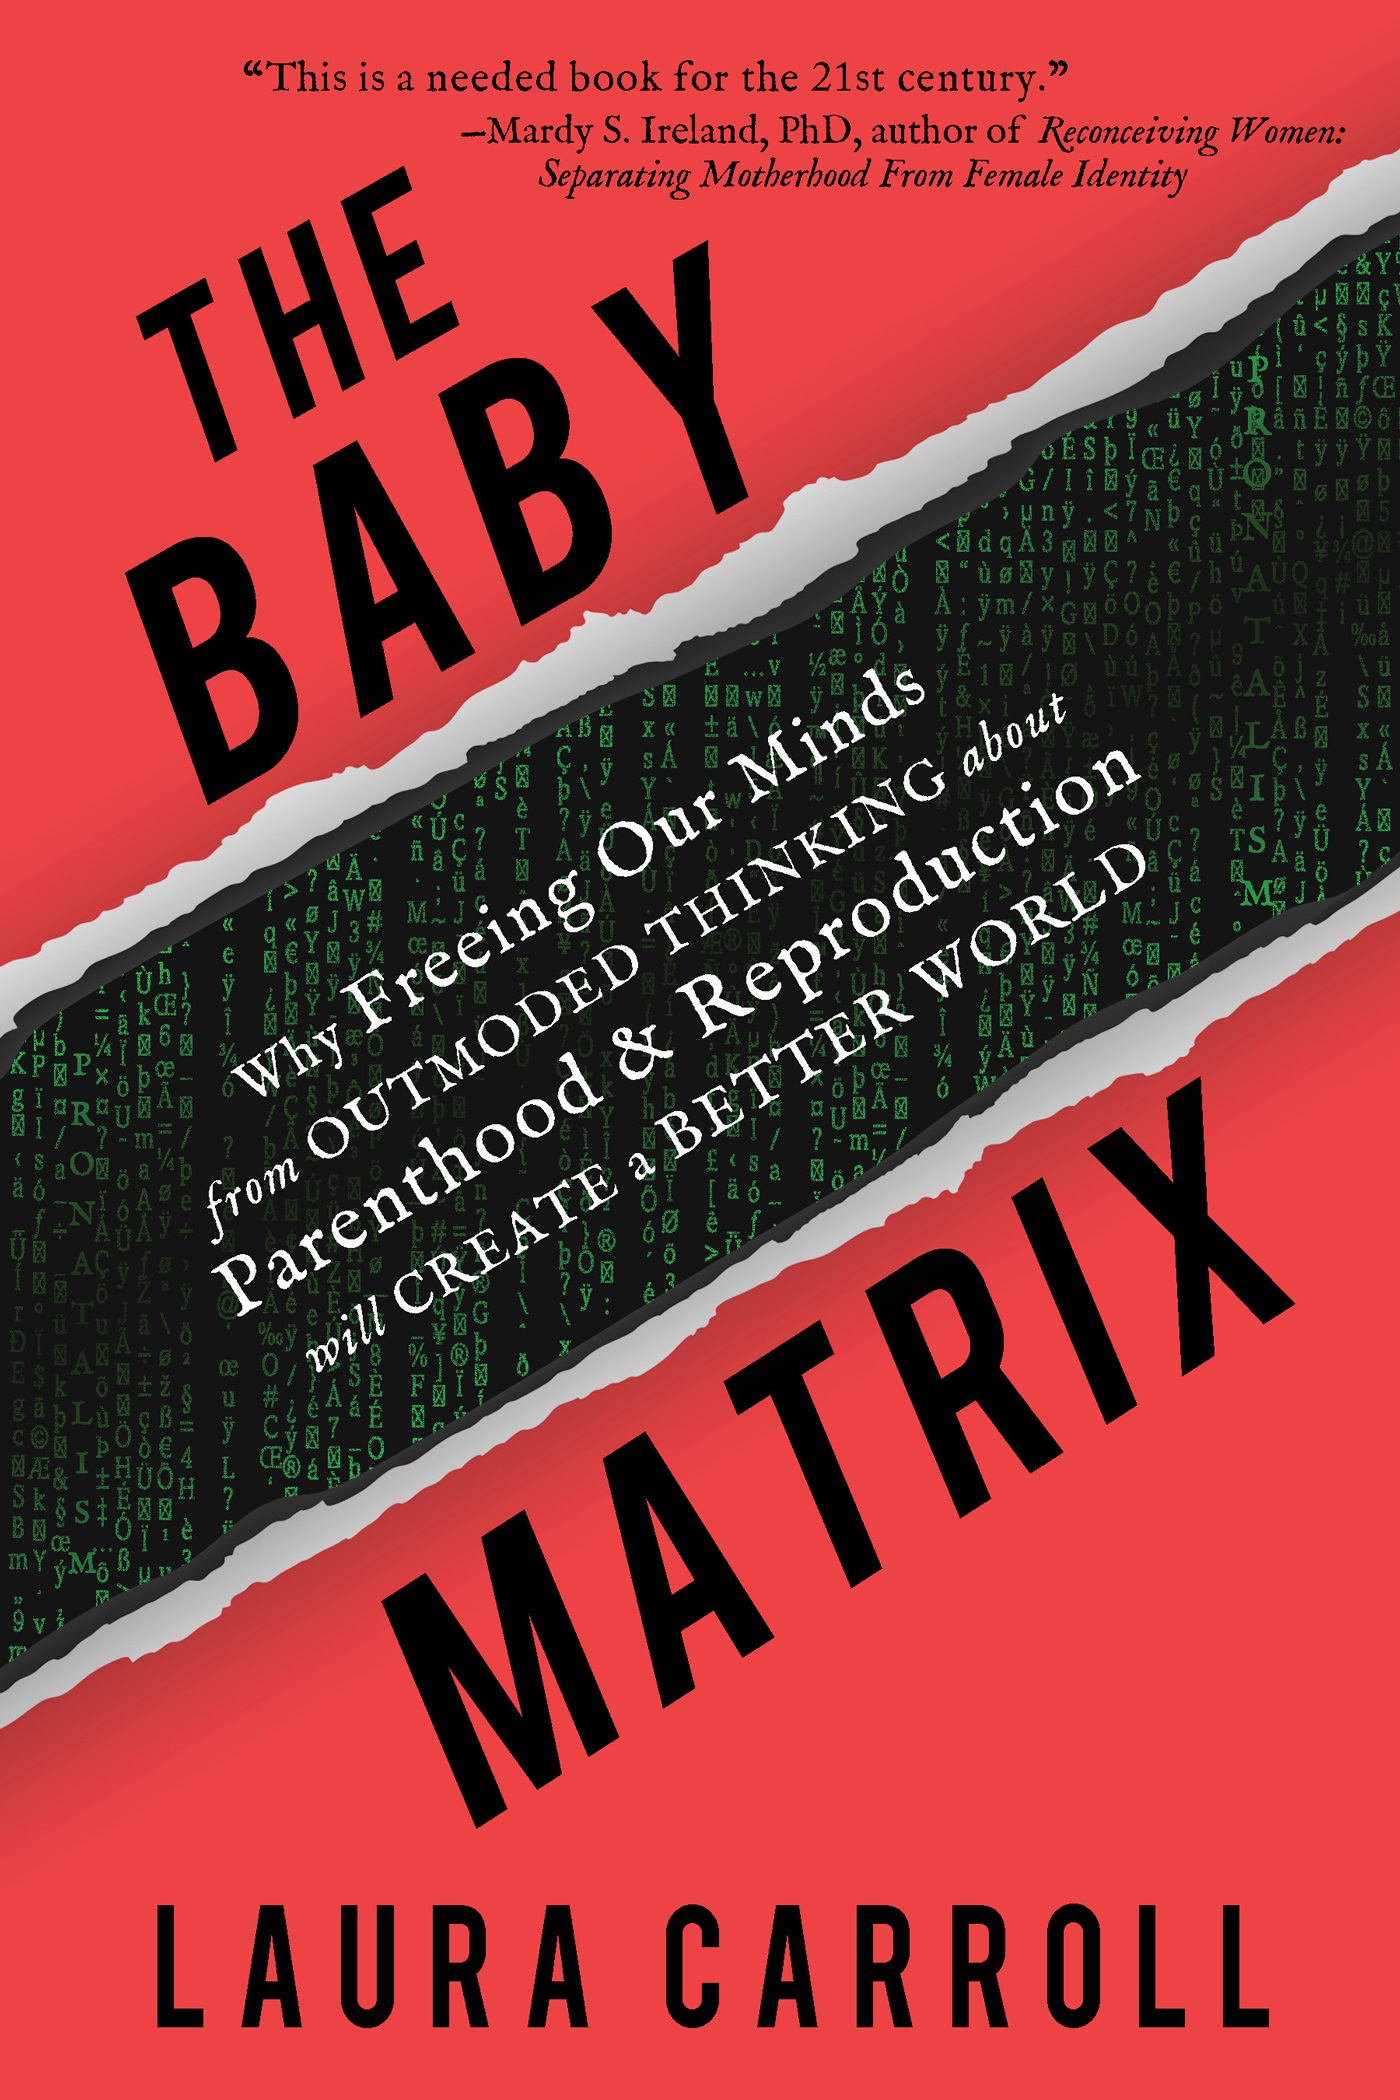 The Baby Matrix: Why Freeing Our Minds From Outmoded Thinking About Parenthood & Reproduction Will Create a Better World